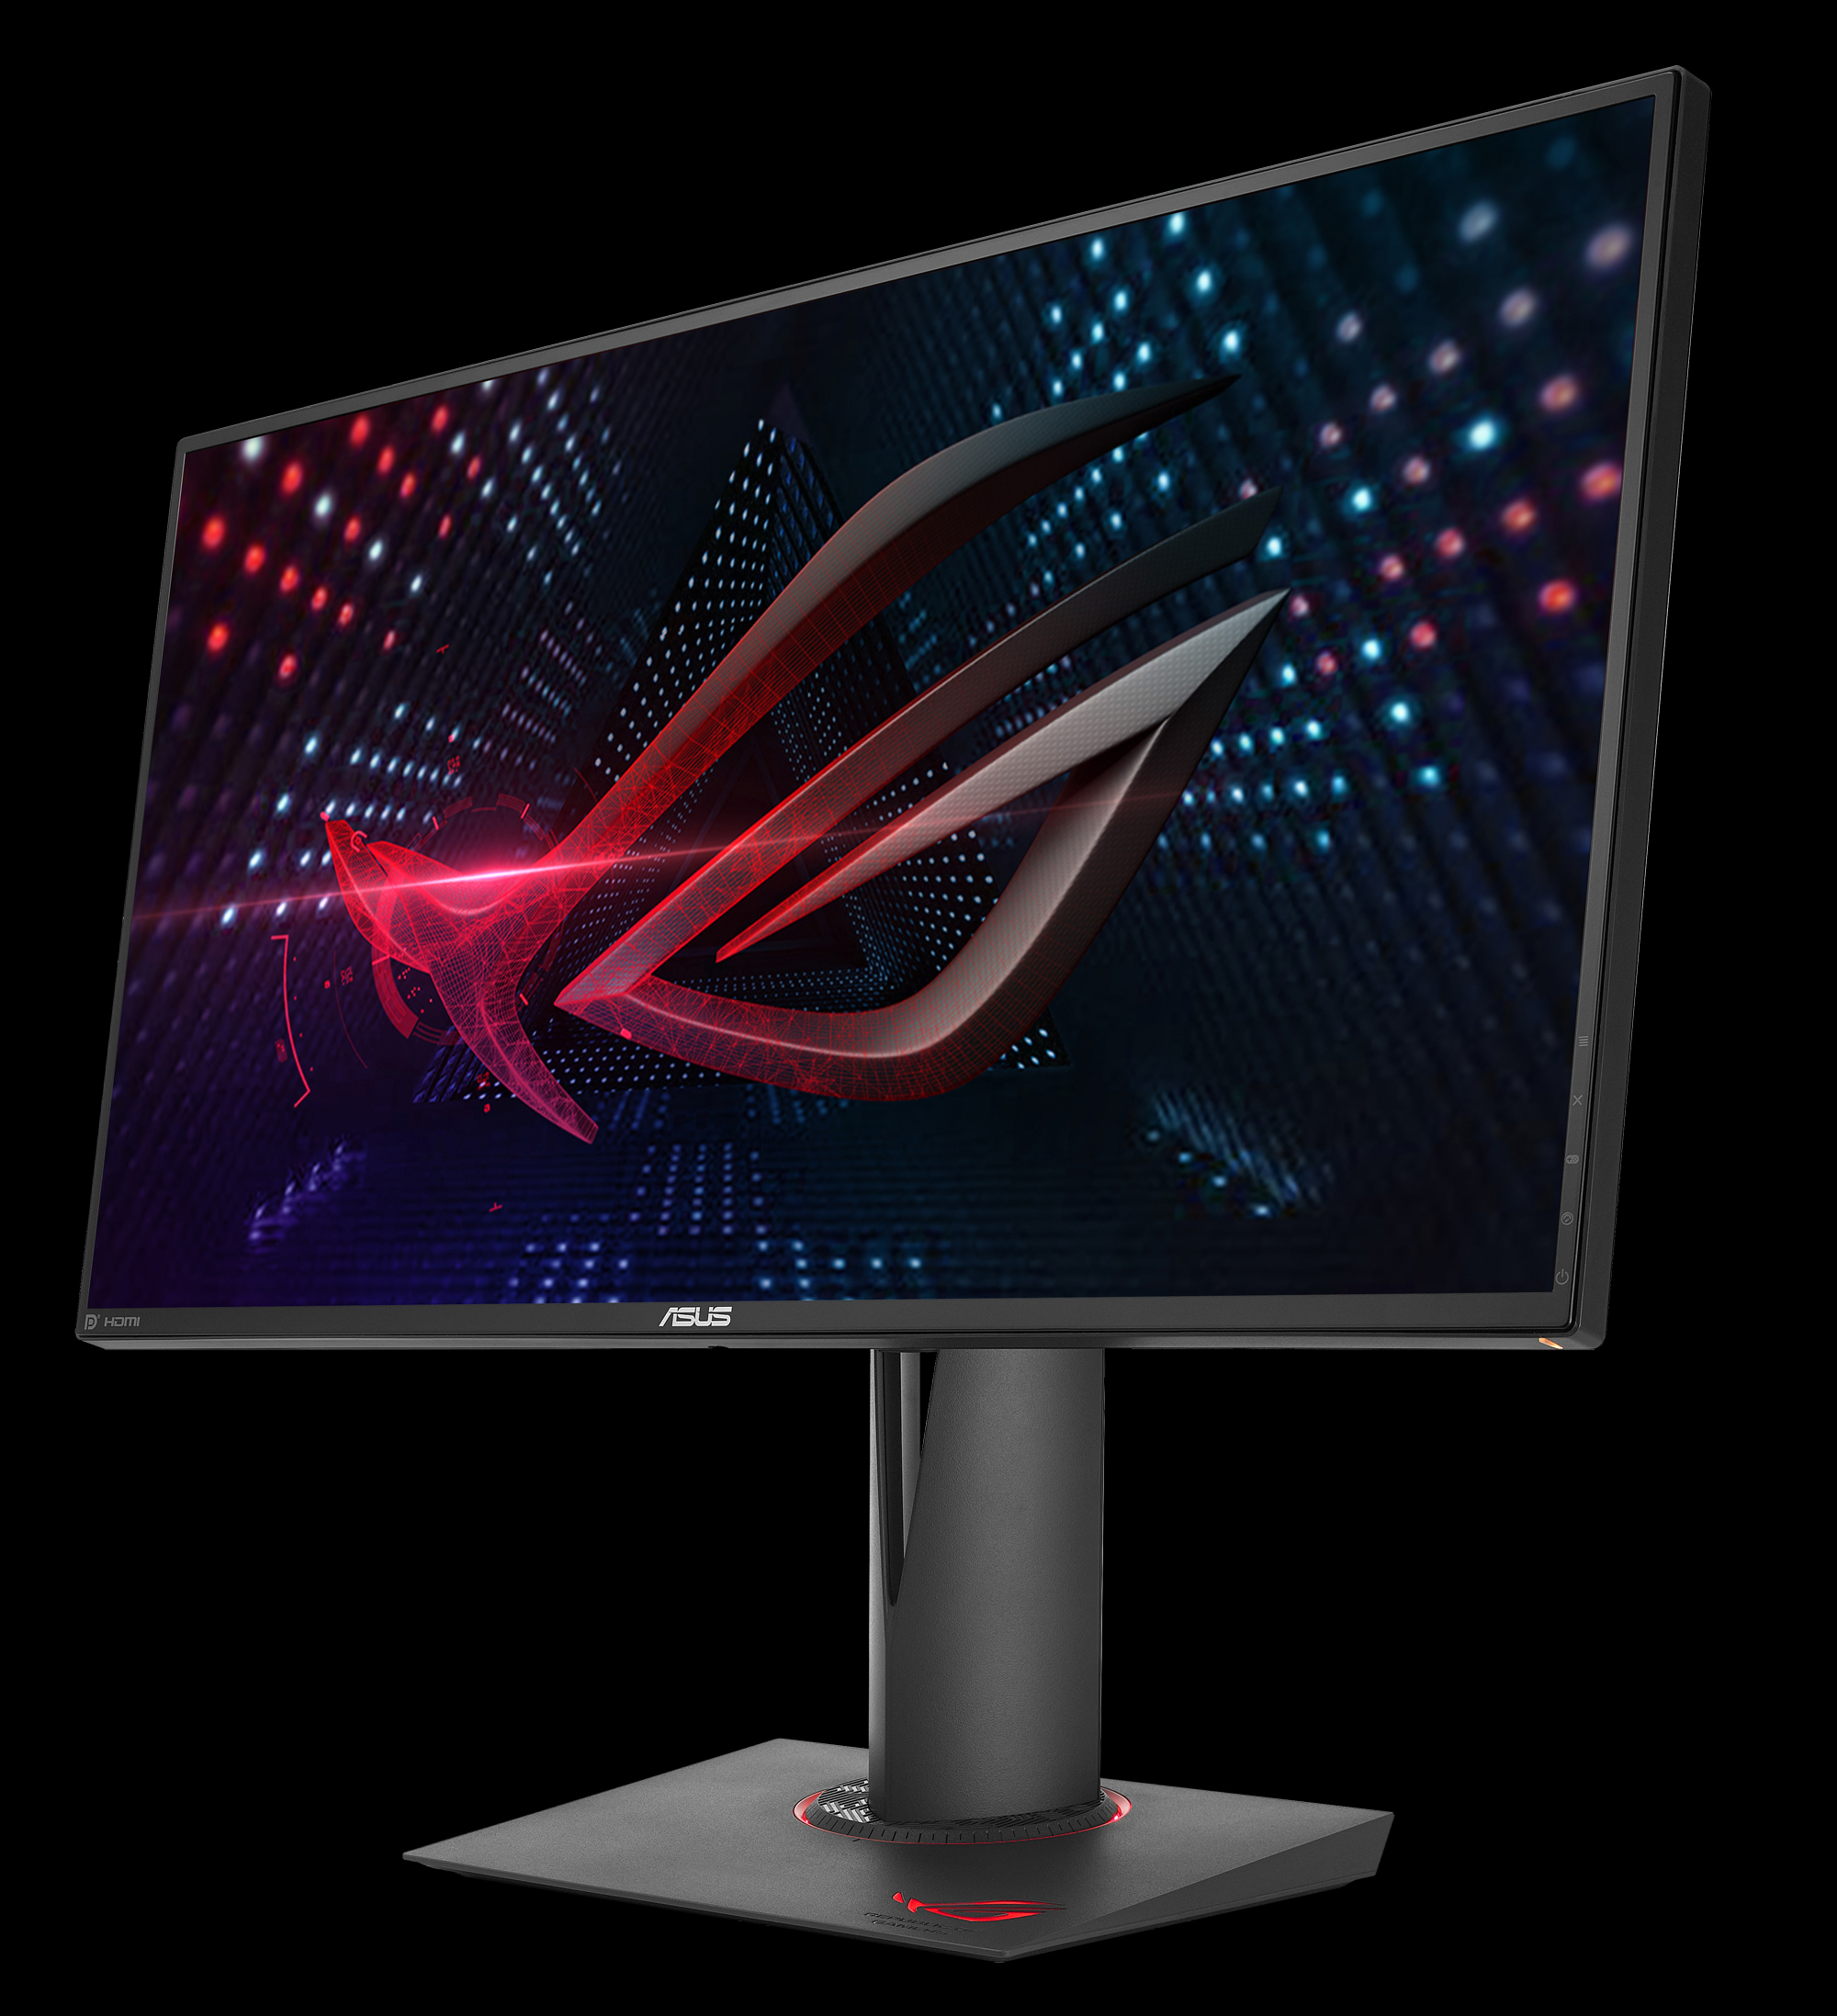 Media asset in full size related to 3dfxzone.it news item entitled as follows: ASUS lancia i monitor gaming-oriented ROG Swift PG279Q e Swift PG27AQ | Image Name: news23257_ASUS-ROG-Swift-PG279Q_1.jpg